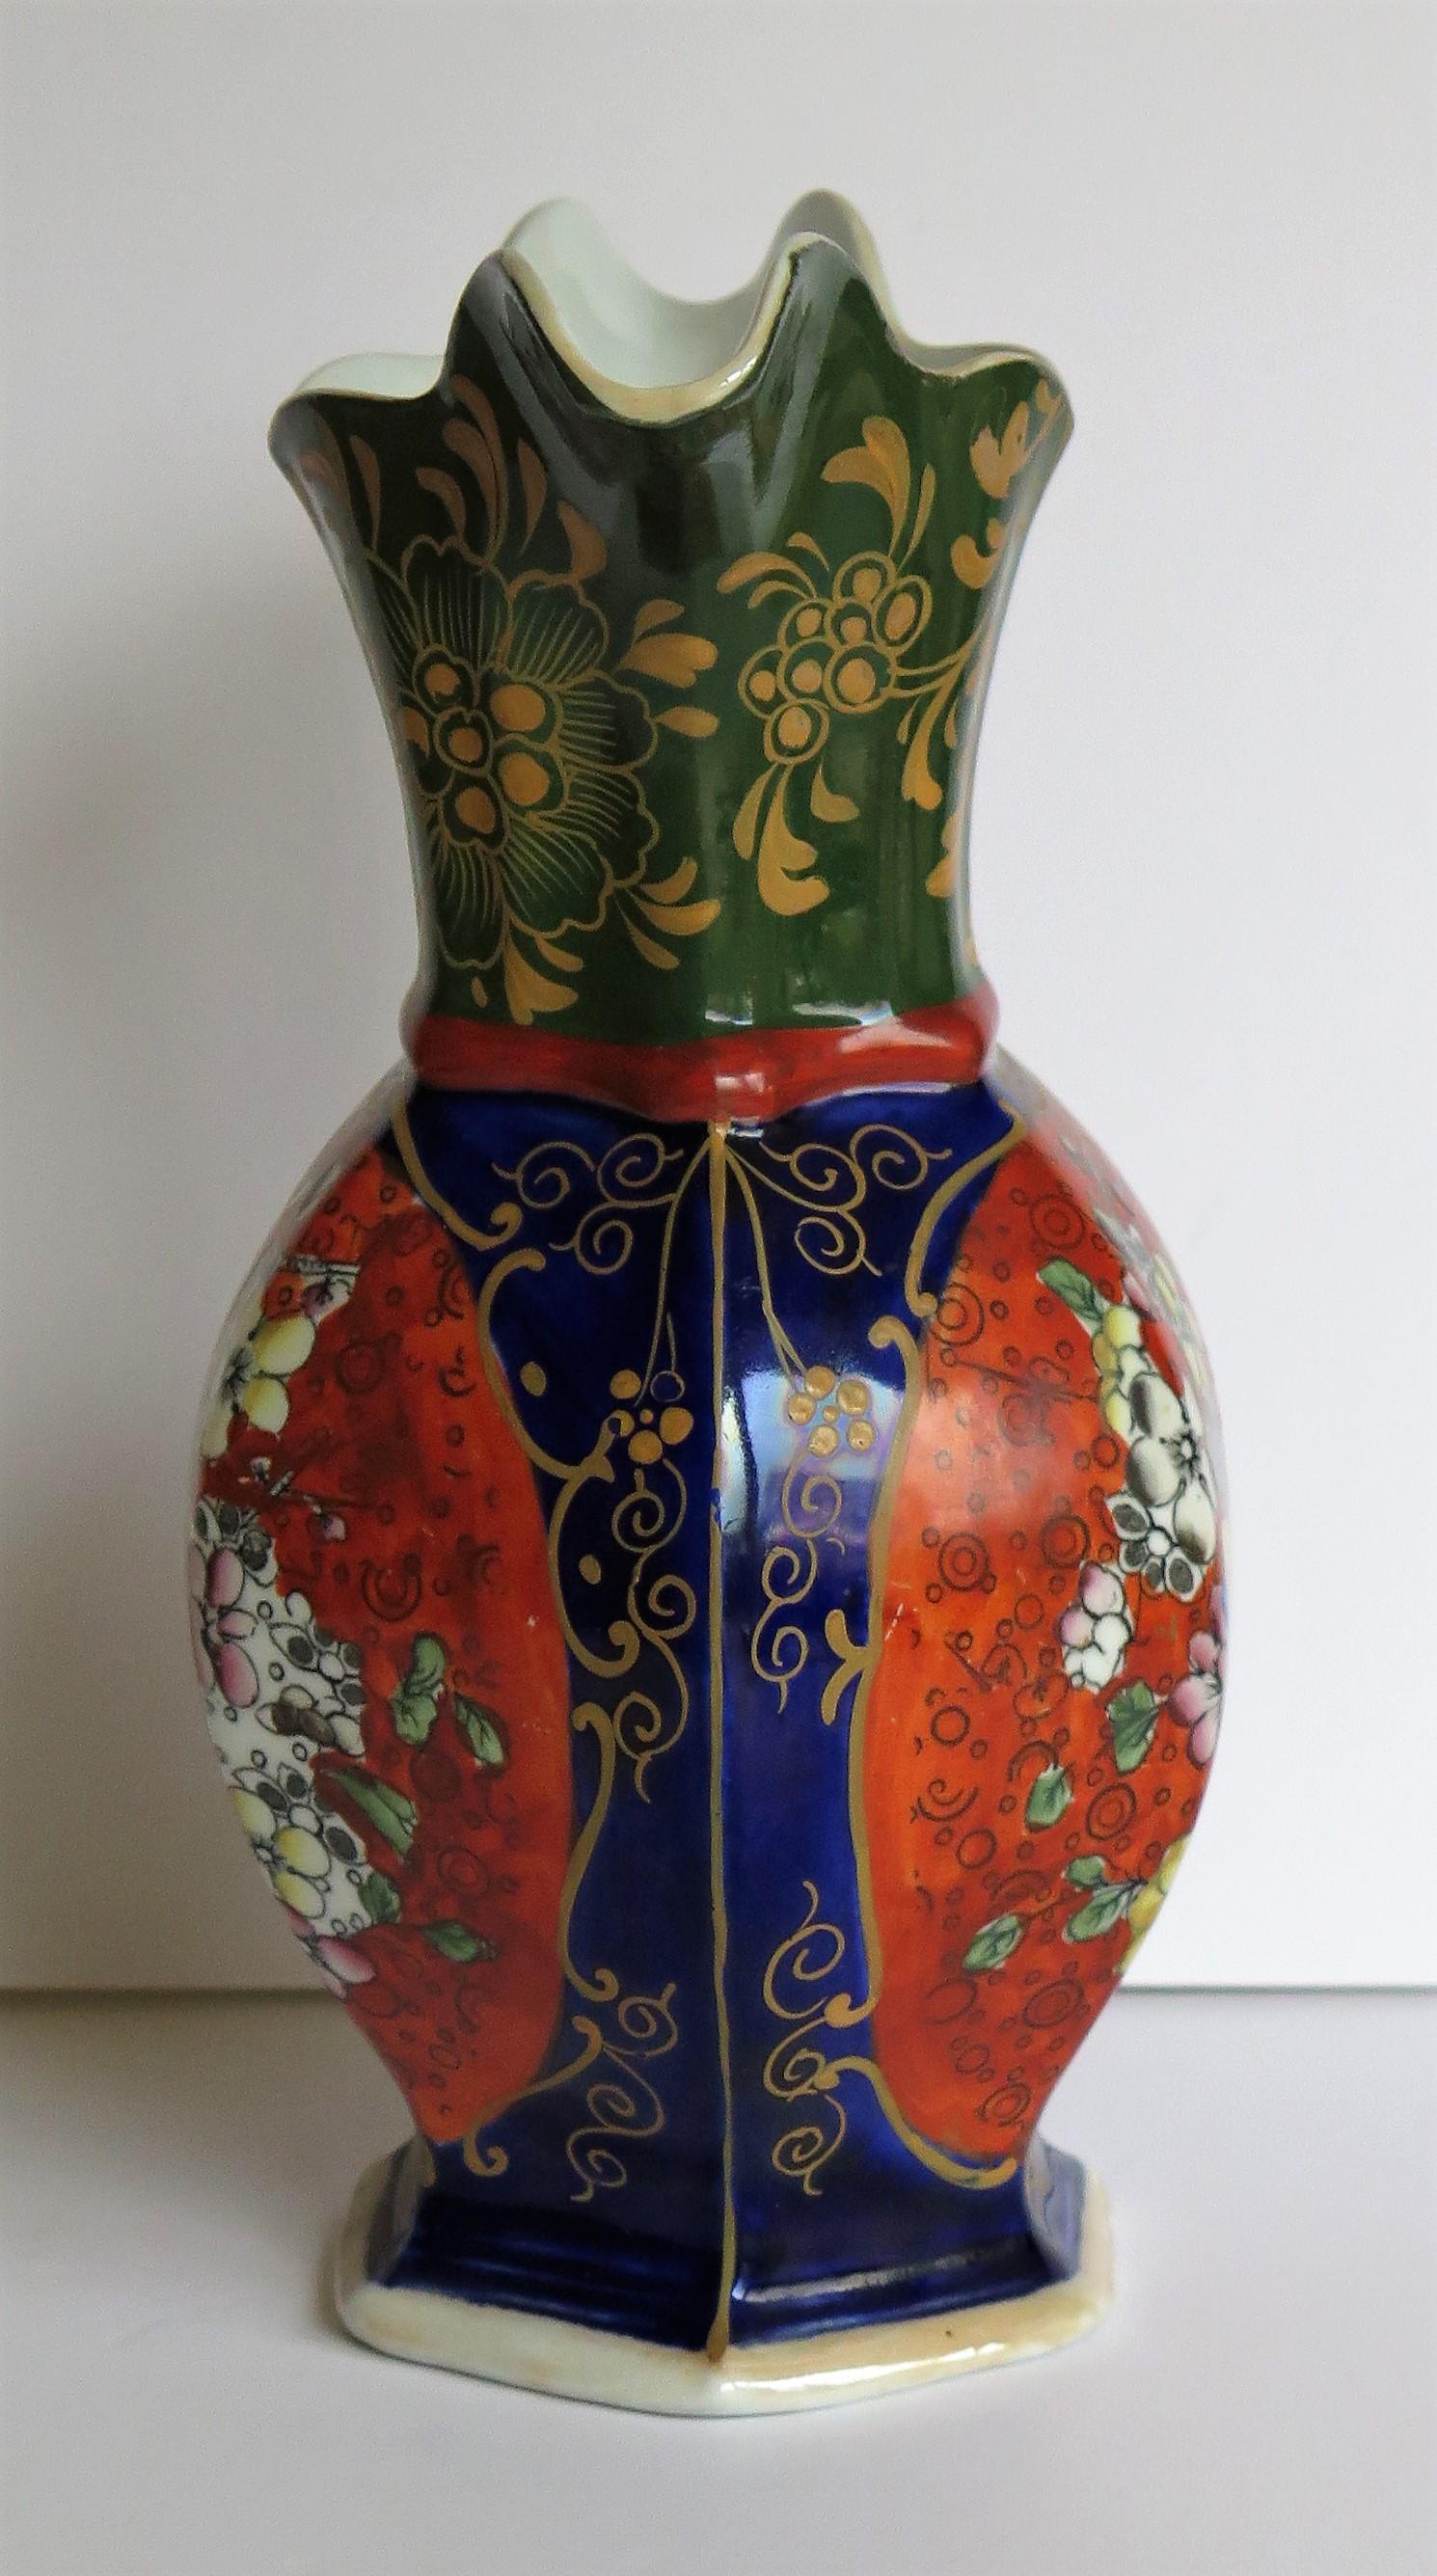 Hand-Painted Mason's Ironstone Vase Hand Painted in Landscape and Prunus Pattern, circa 1830